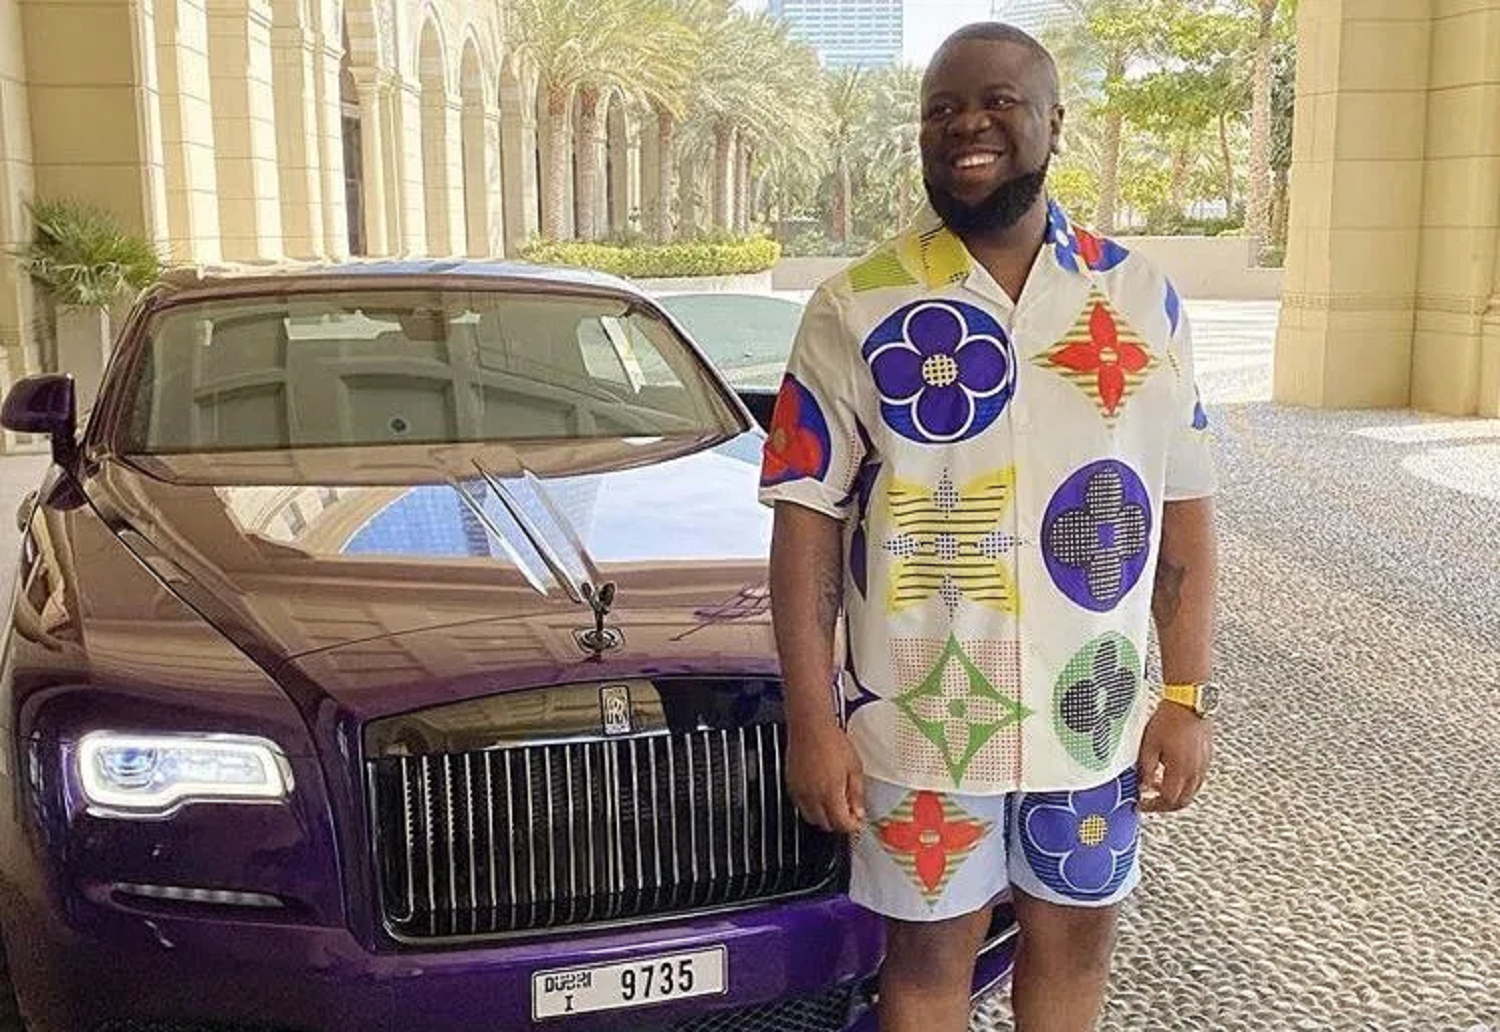 Hushpuppi faces up to 20 years in US prison if convicted